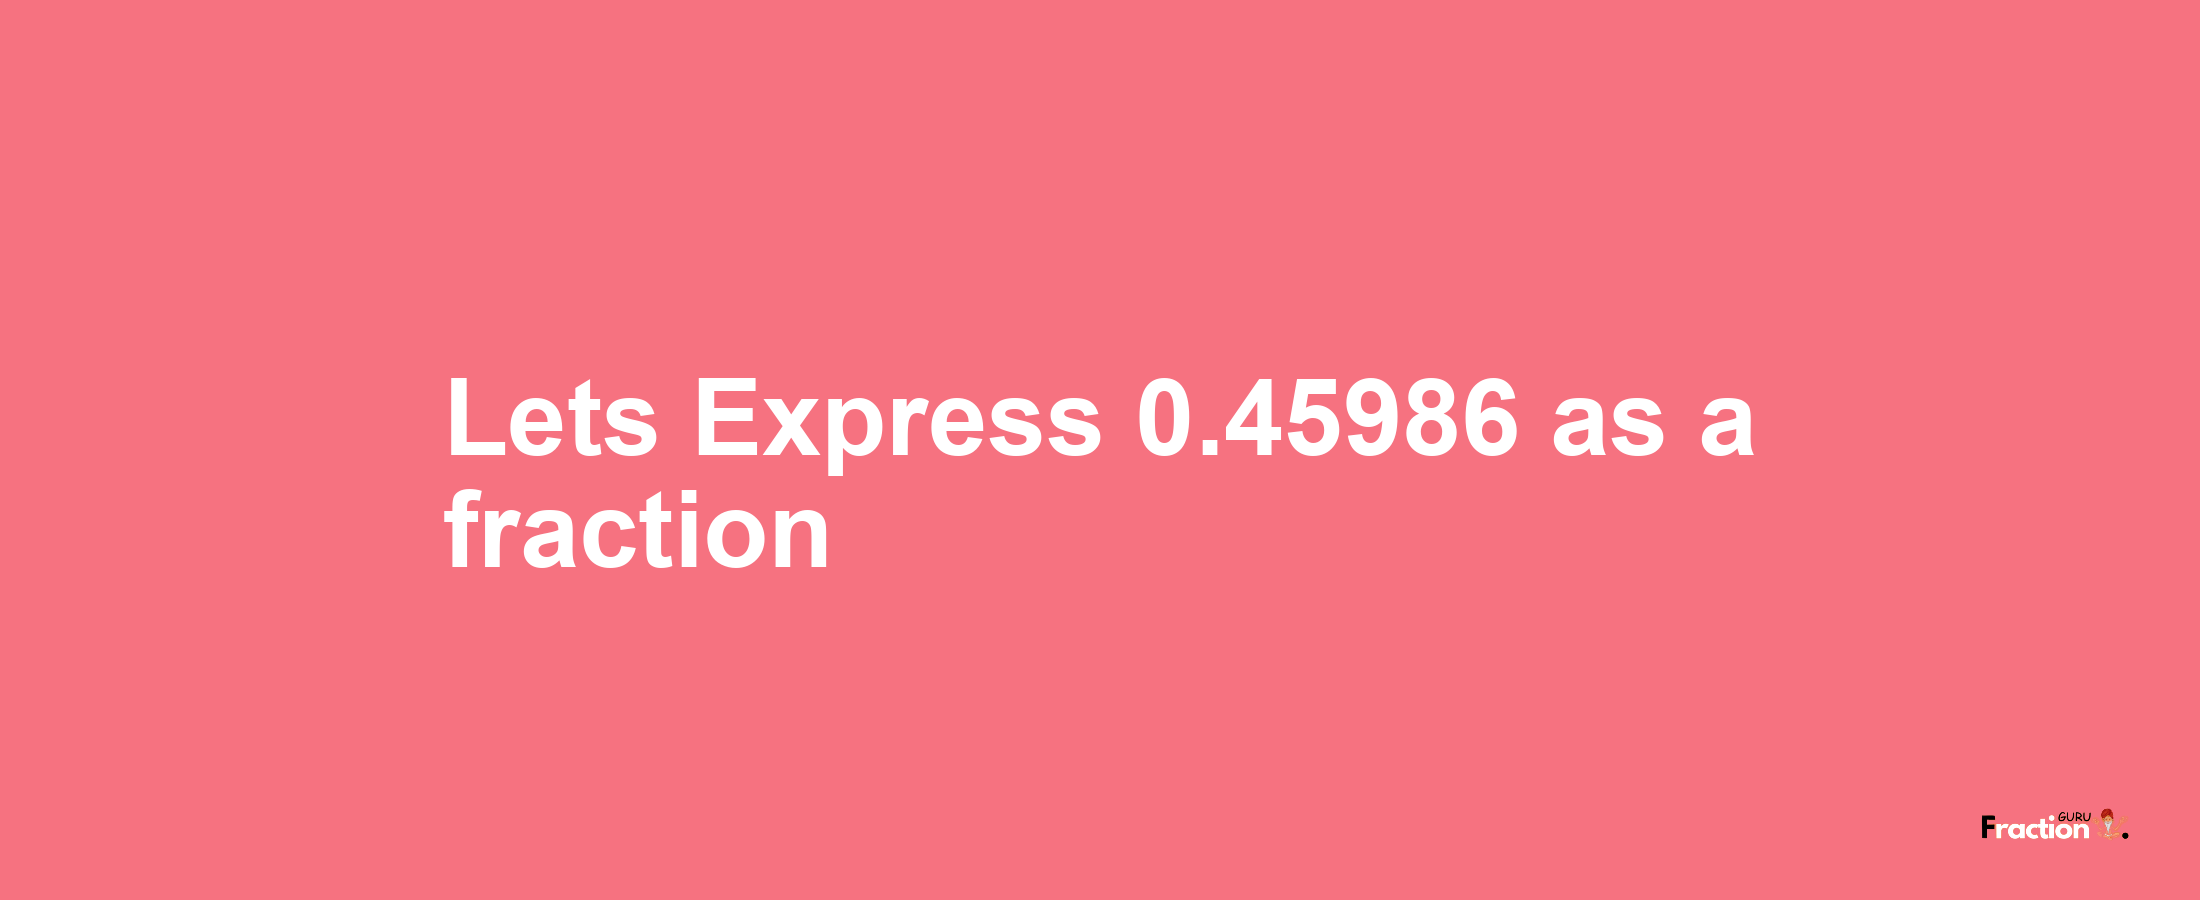 Lets Express 0.45986 as afraction